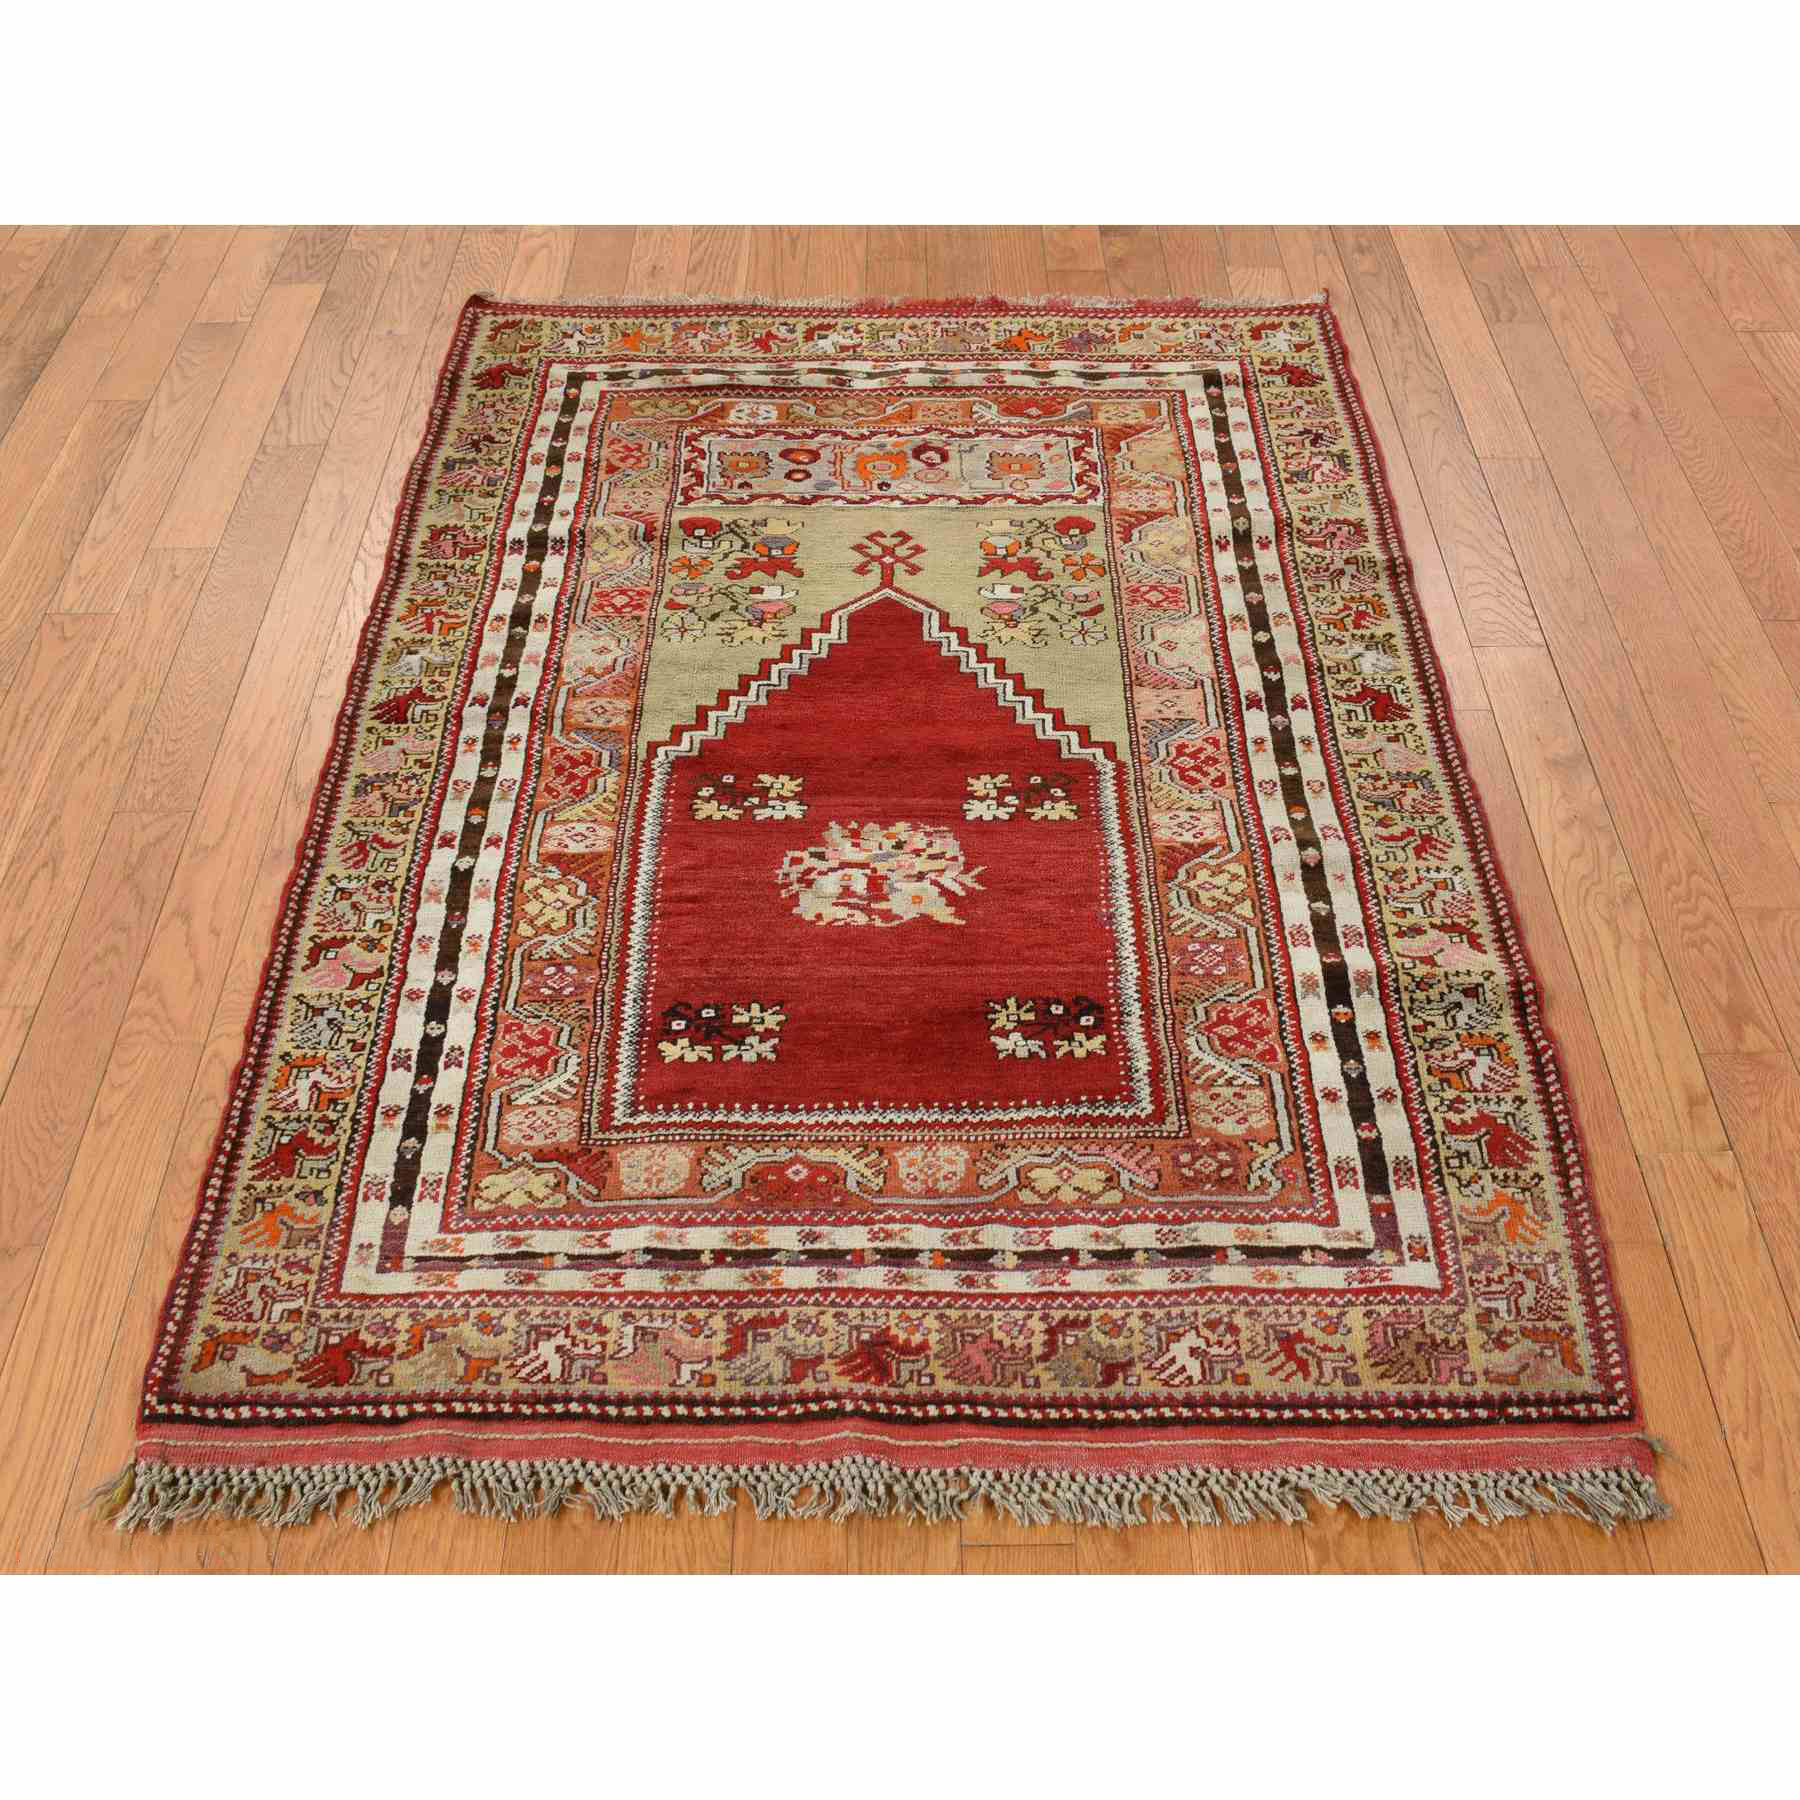 Antique-Hand-Knotted-Rug-391015